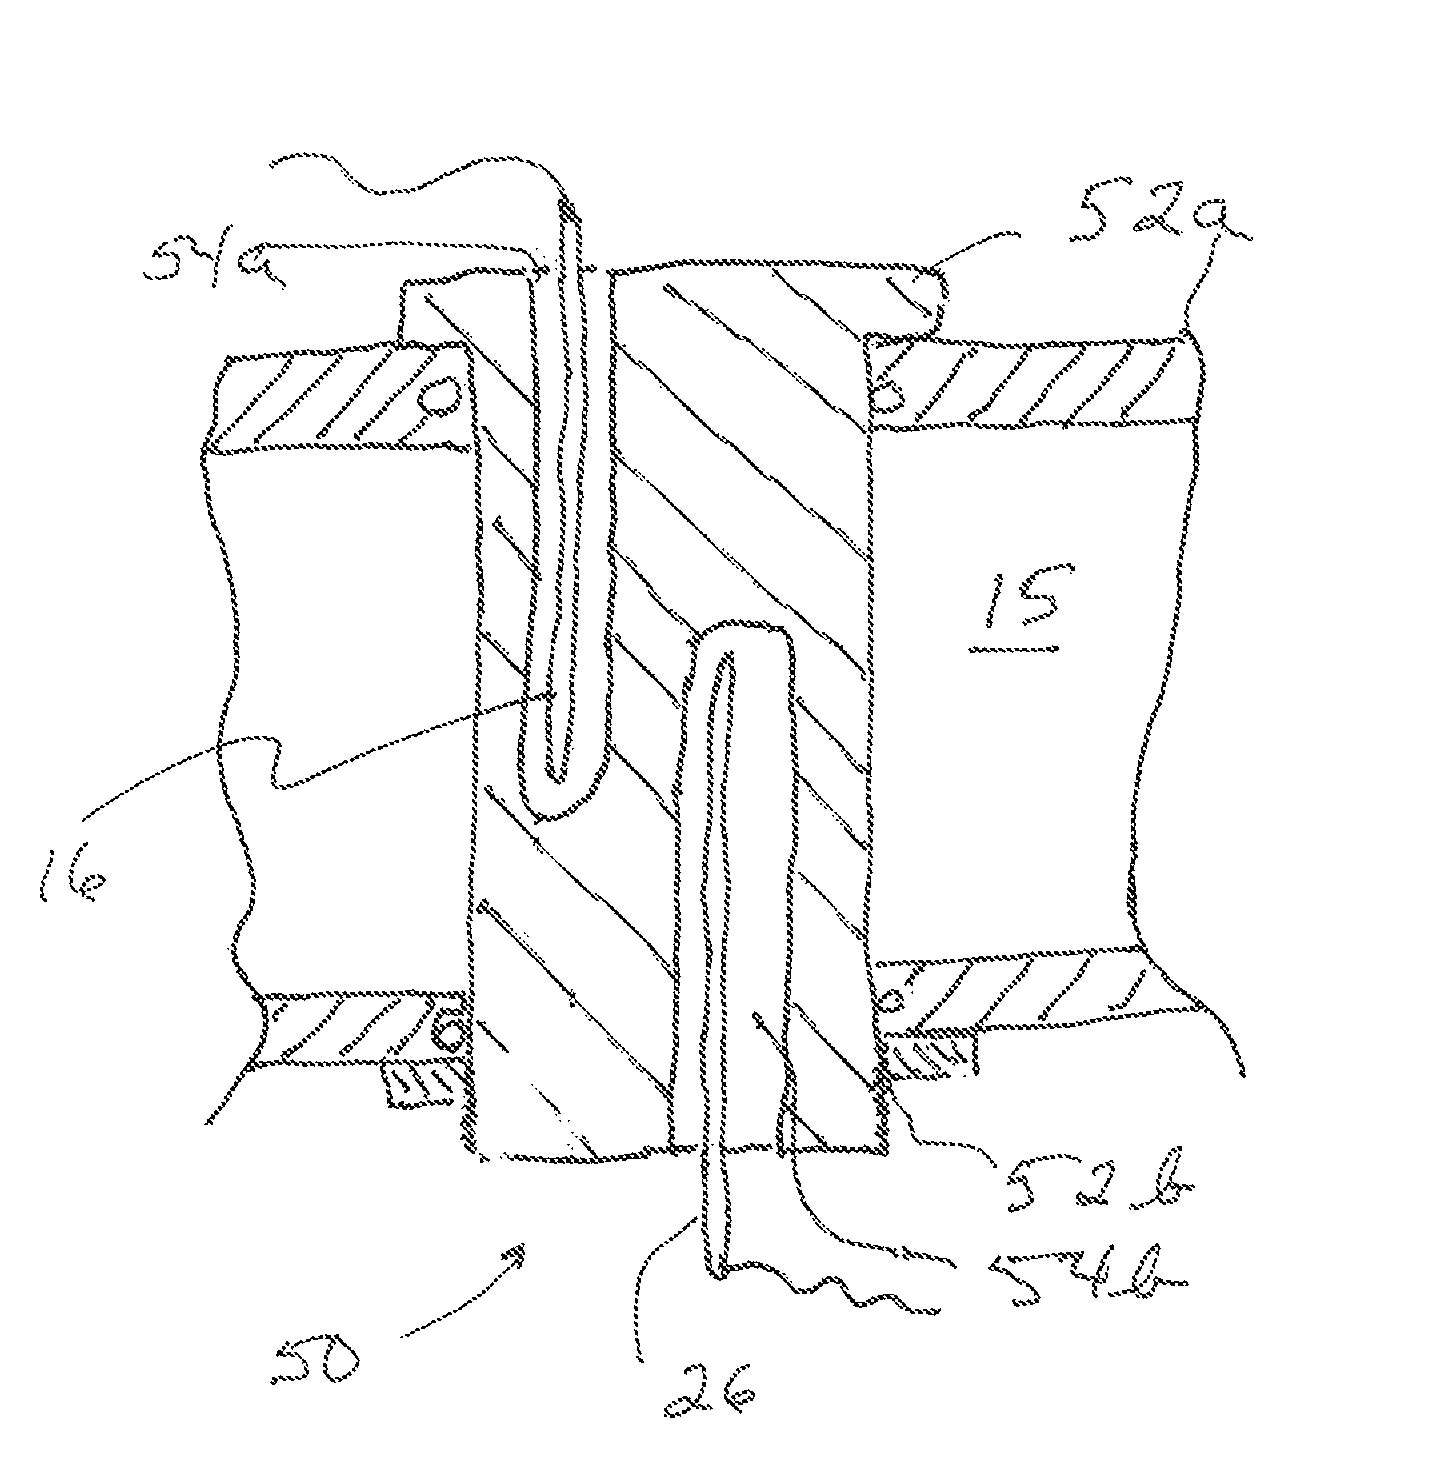 Calibration apparatus and method for heat transfer measurement